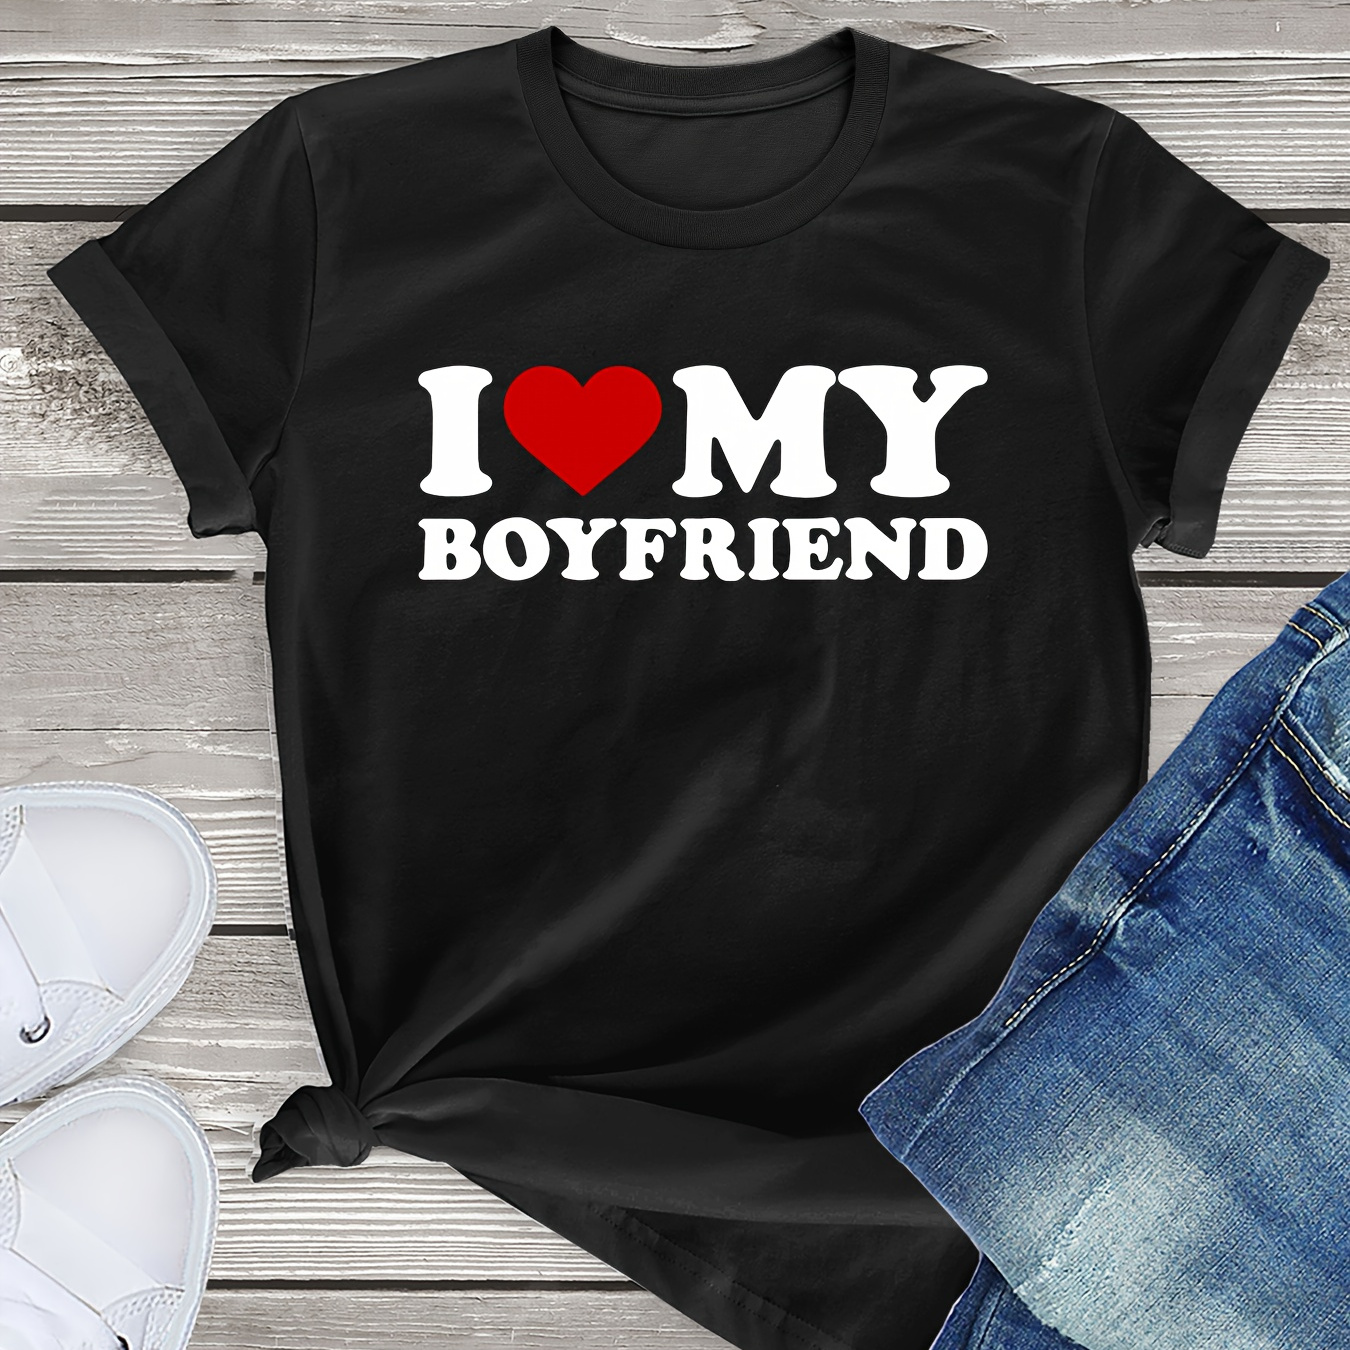 

Love Boyfriend Graphic Tee Shirt, Crew Neck Short Sleeve Casual Everyday Tops For Valentine's Day Gifts, Women's Clothing